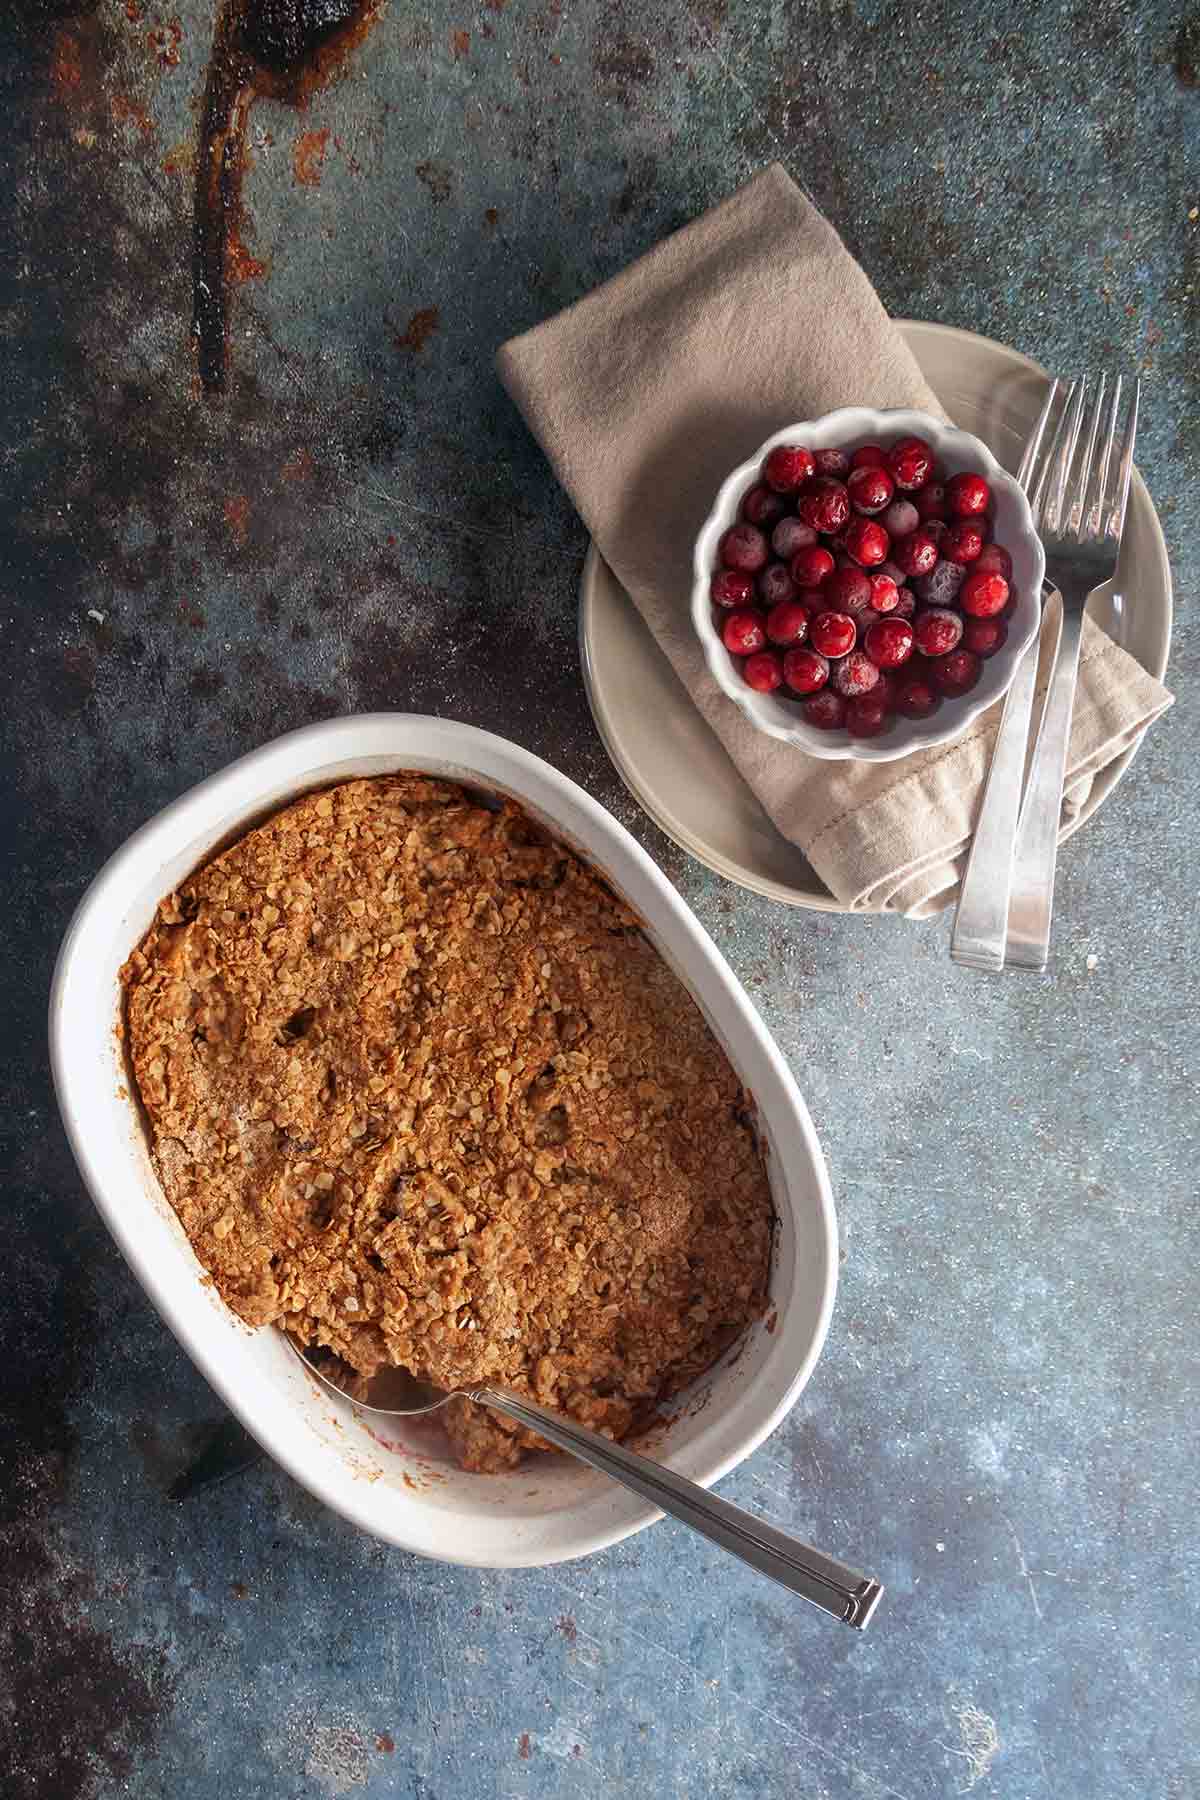 A whole apple cranberry crisp with a serving spoon resting inside.